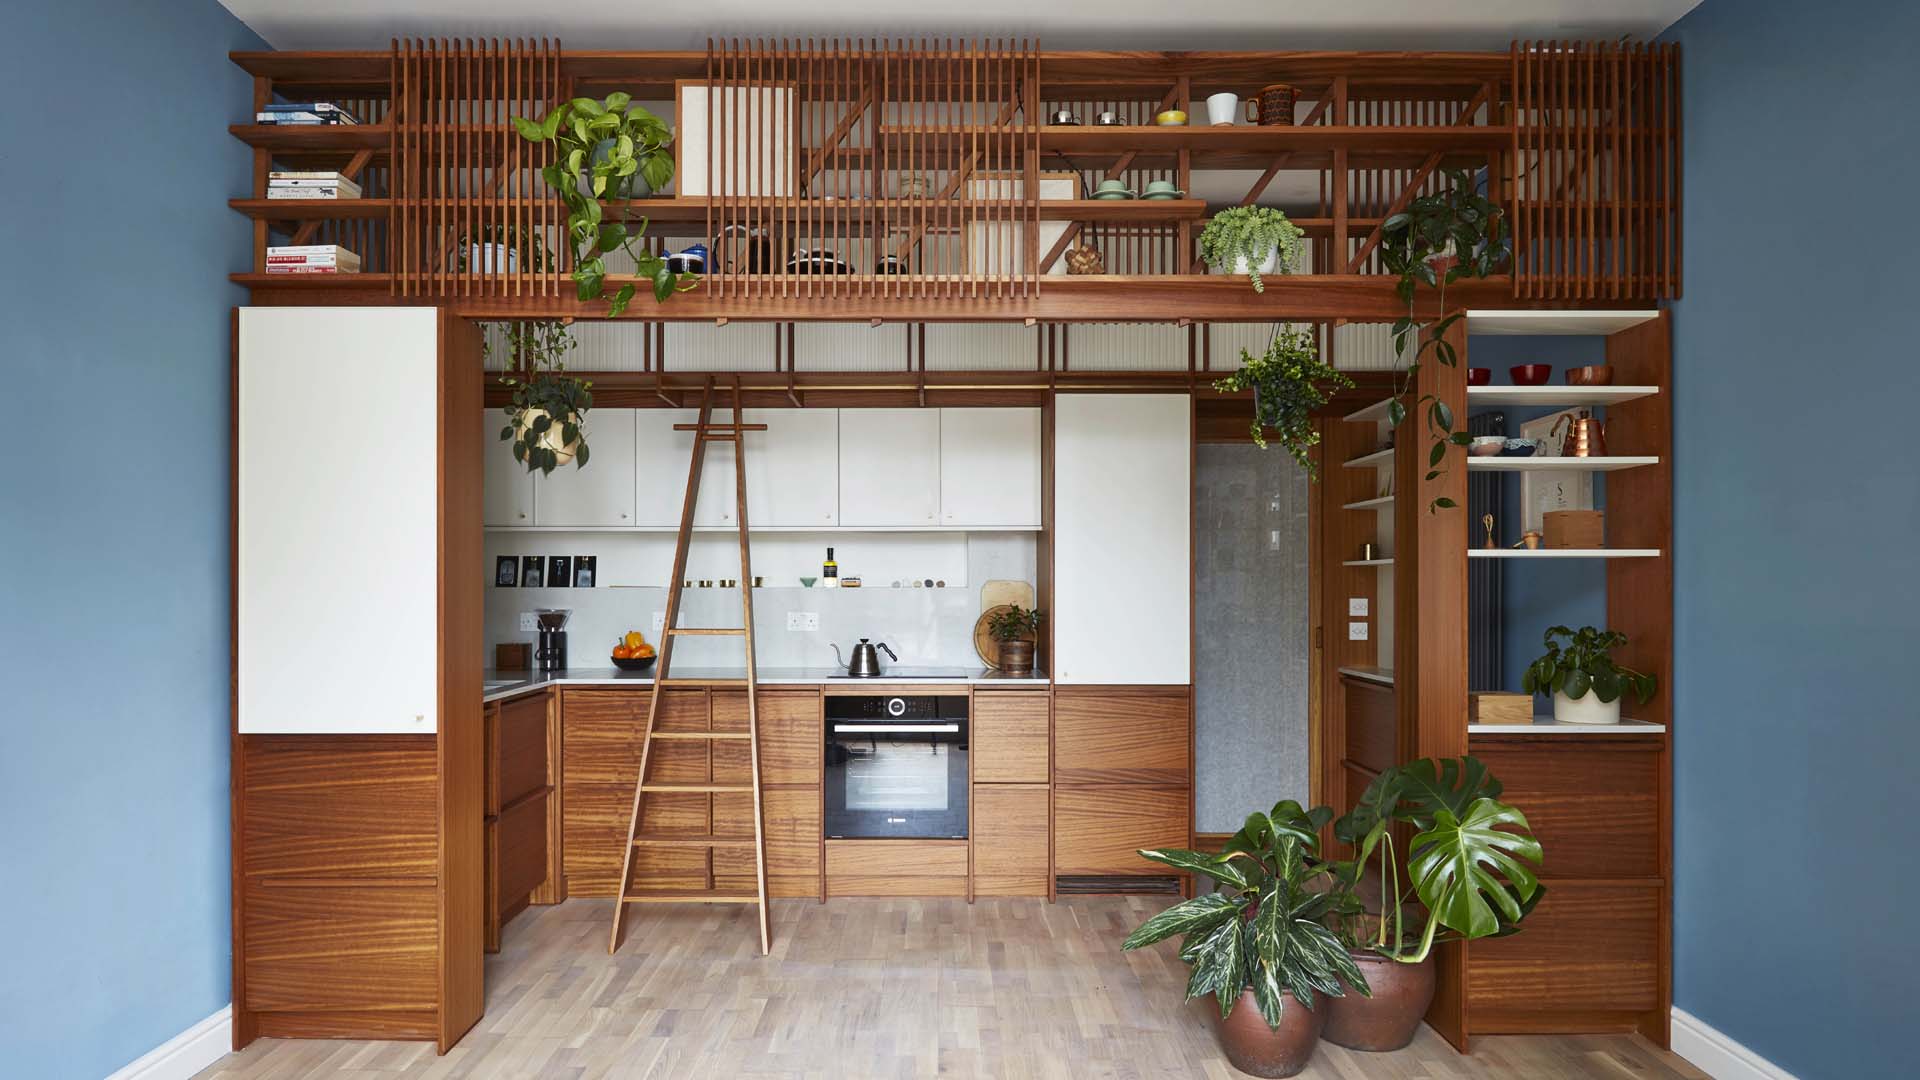 A kitchen with wooden units and blue-grey walls